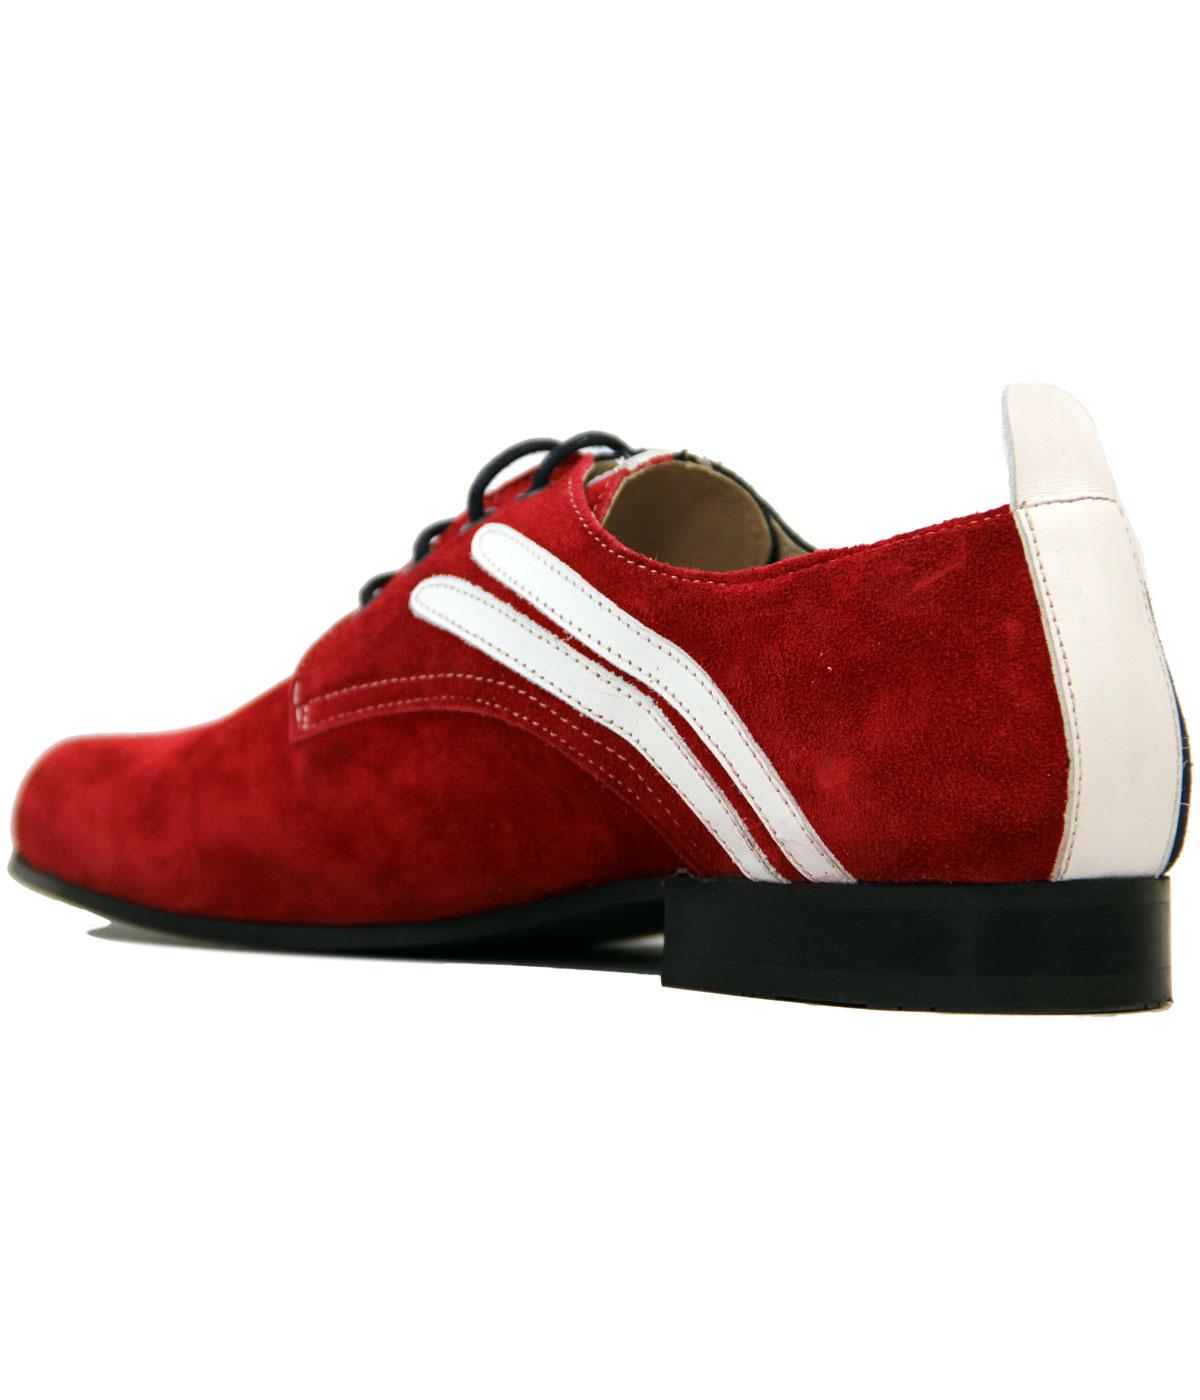 Delicious Junction Rifle Retro Mod Suede Badger Shoes Red/White